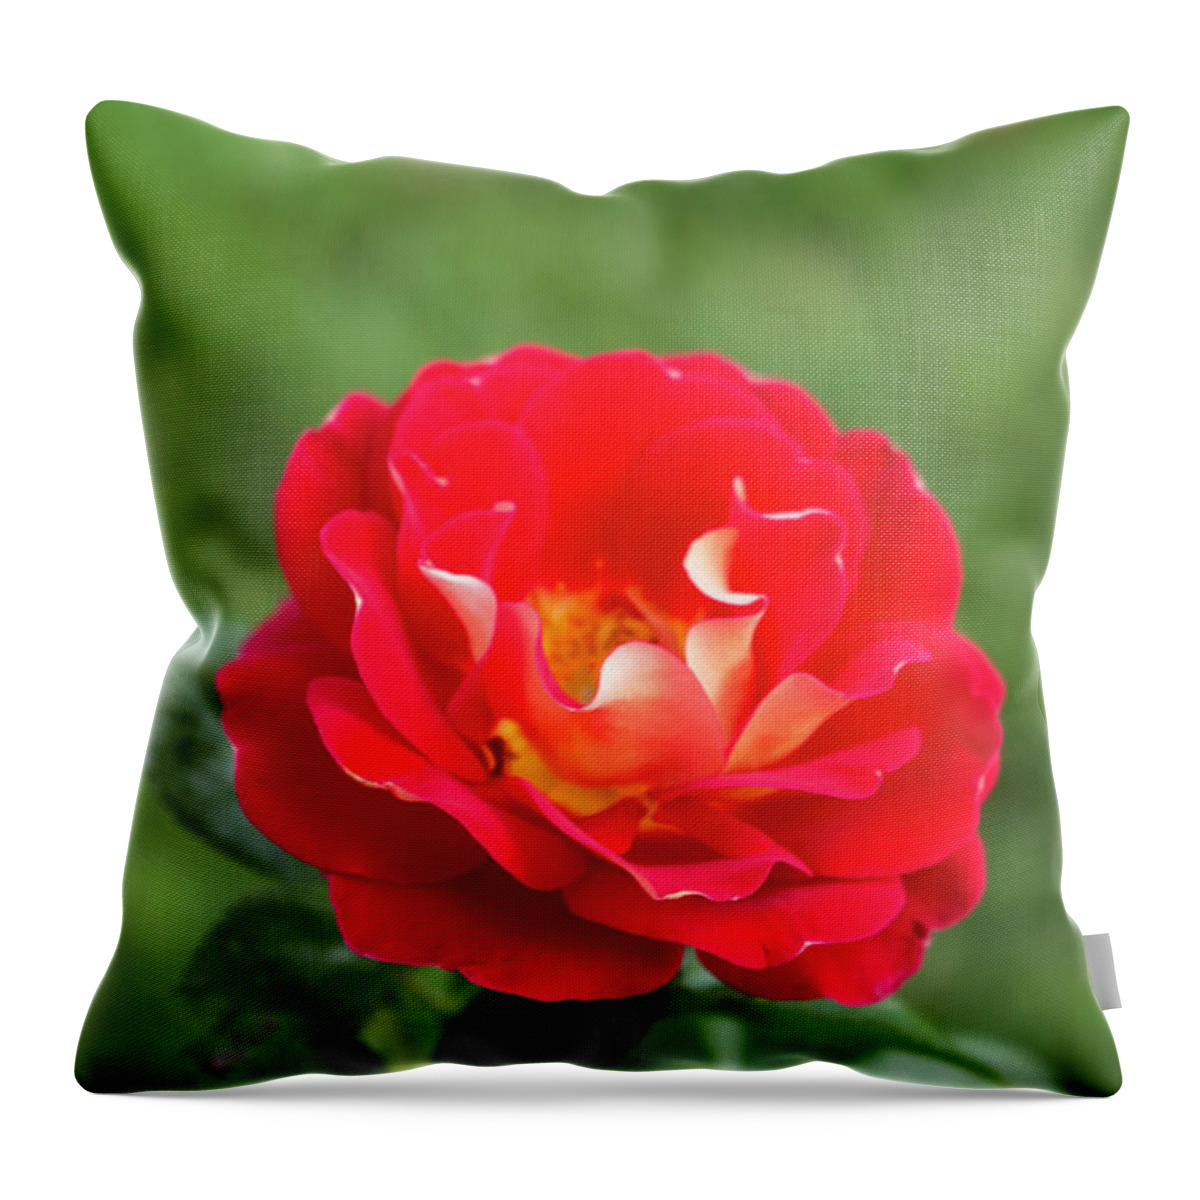 Close-up Throw Pillow featuring the photograph Ketchup and Mustard Rose by K Bradley Washburn